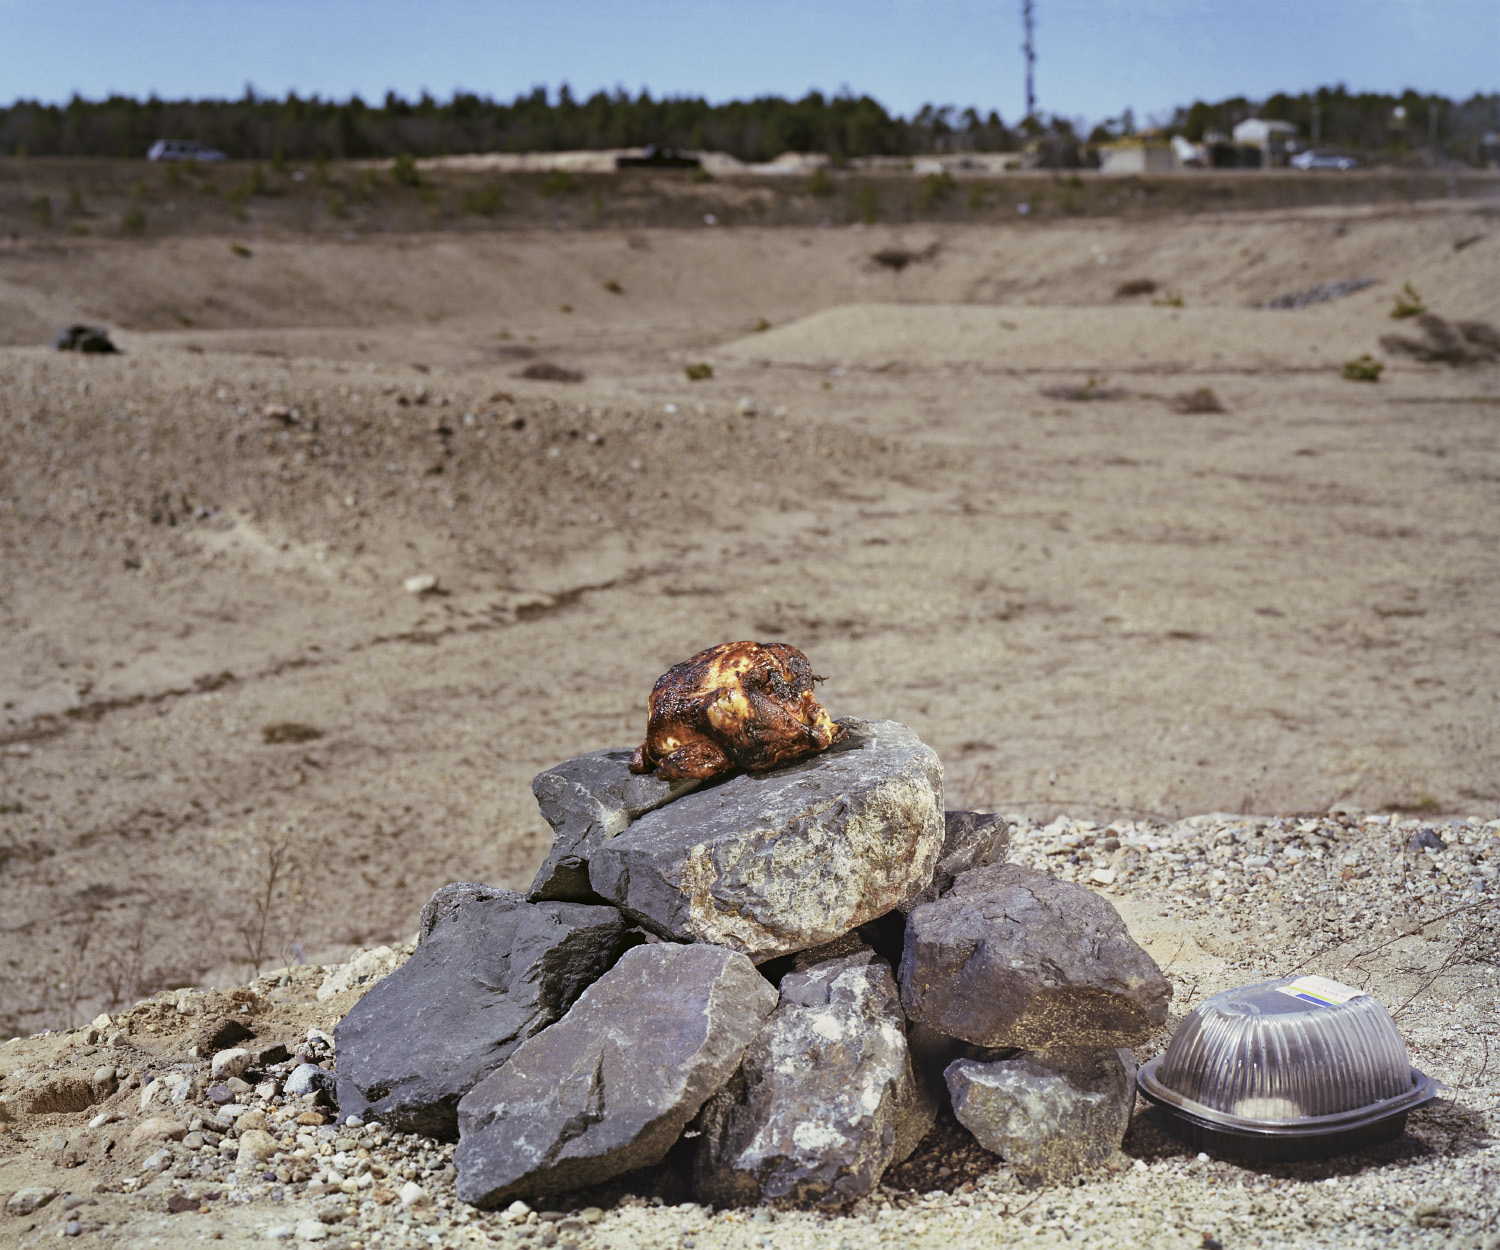  Rotisserie chicken on rock pile in route 44 median. Senior thesis. 